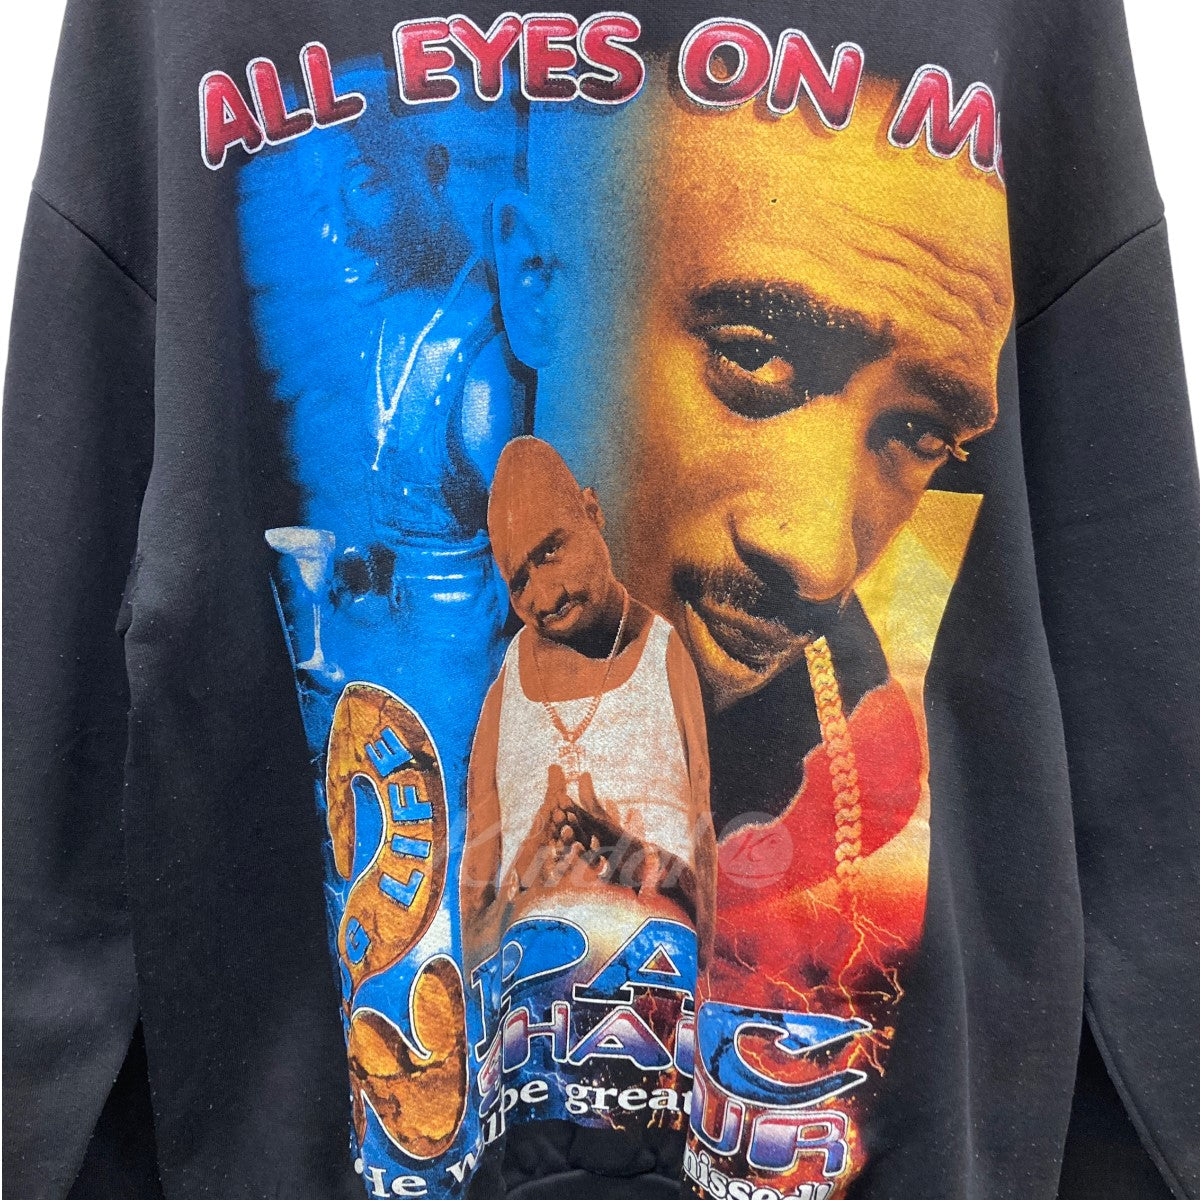 INIFINI-T(インフィニティ) 「90s ALL EYES ON ME 2PAC」 2PACプリントスウェット